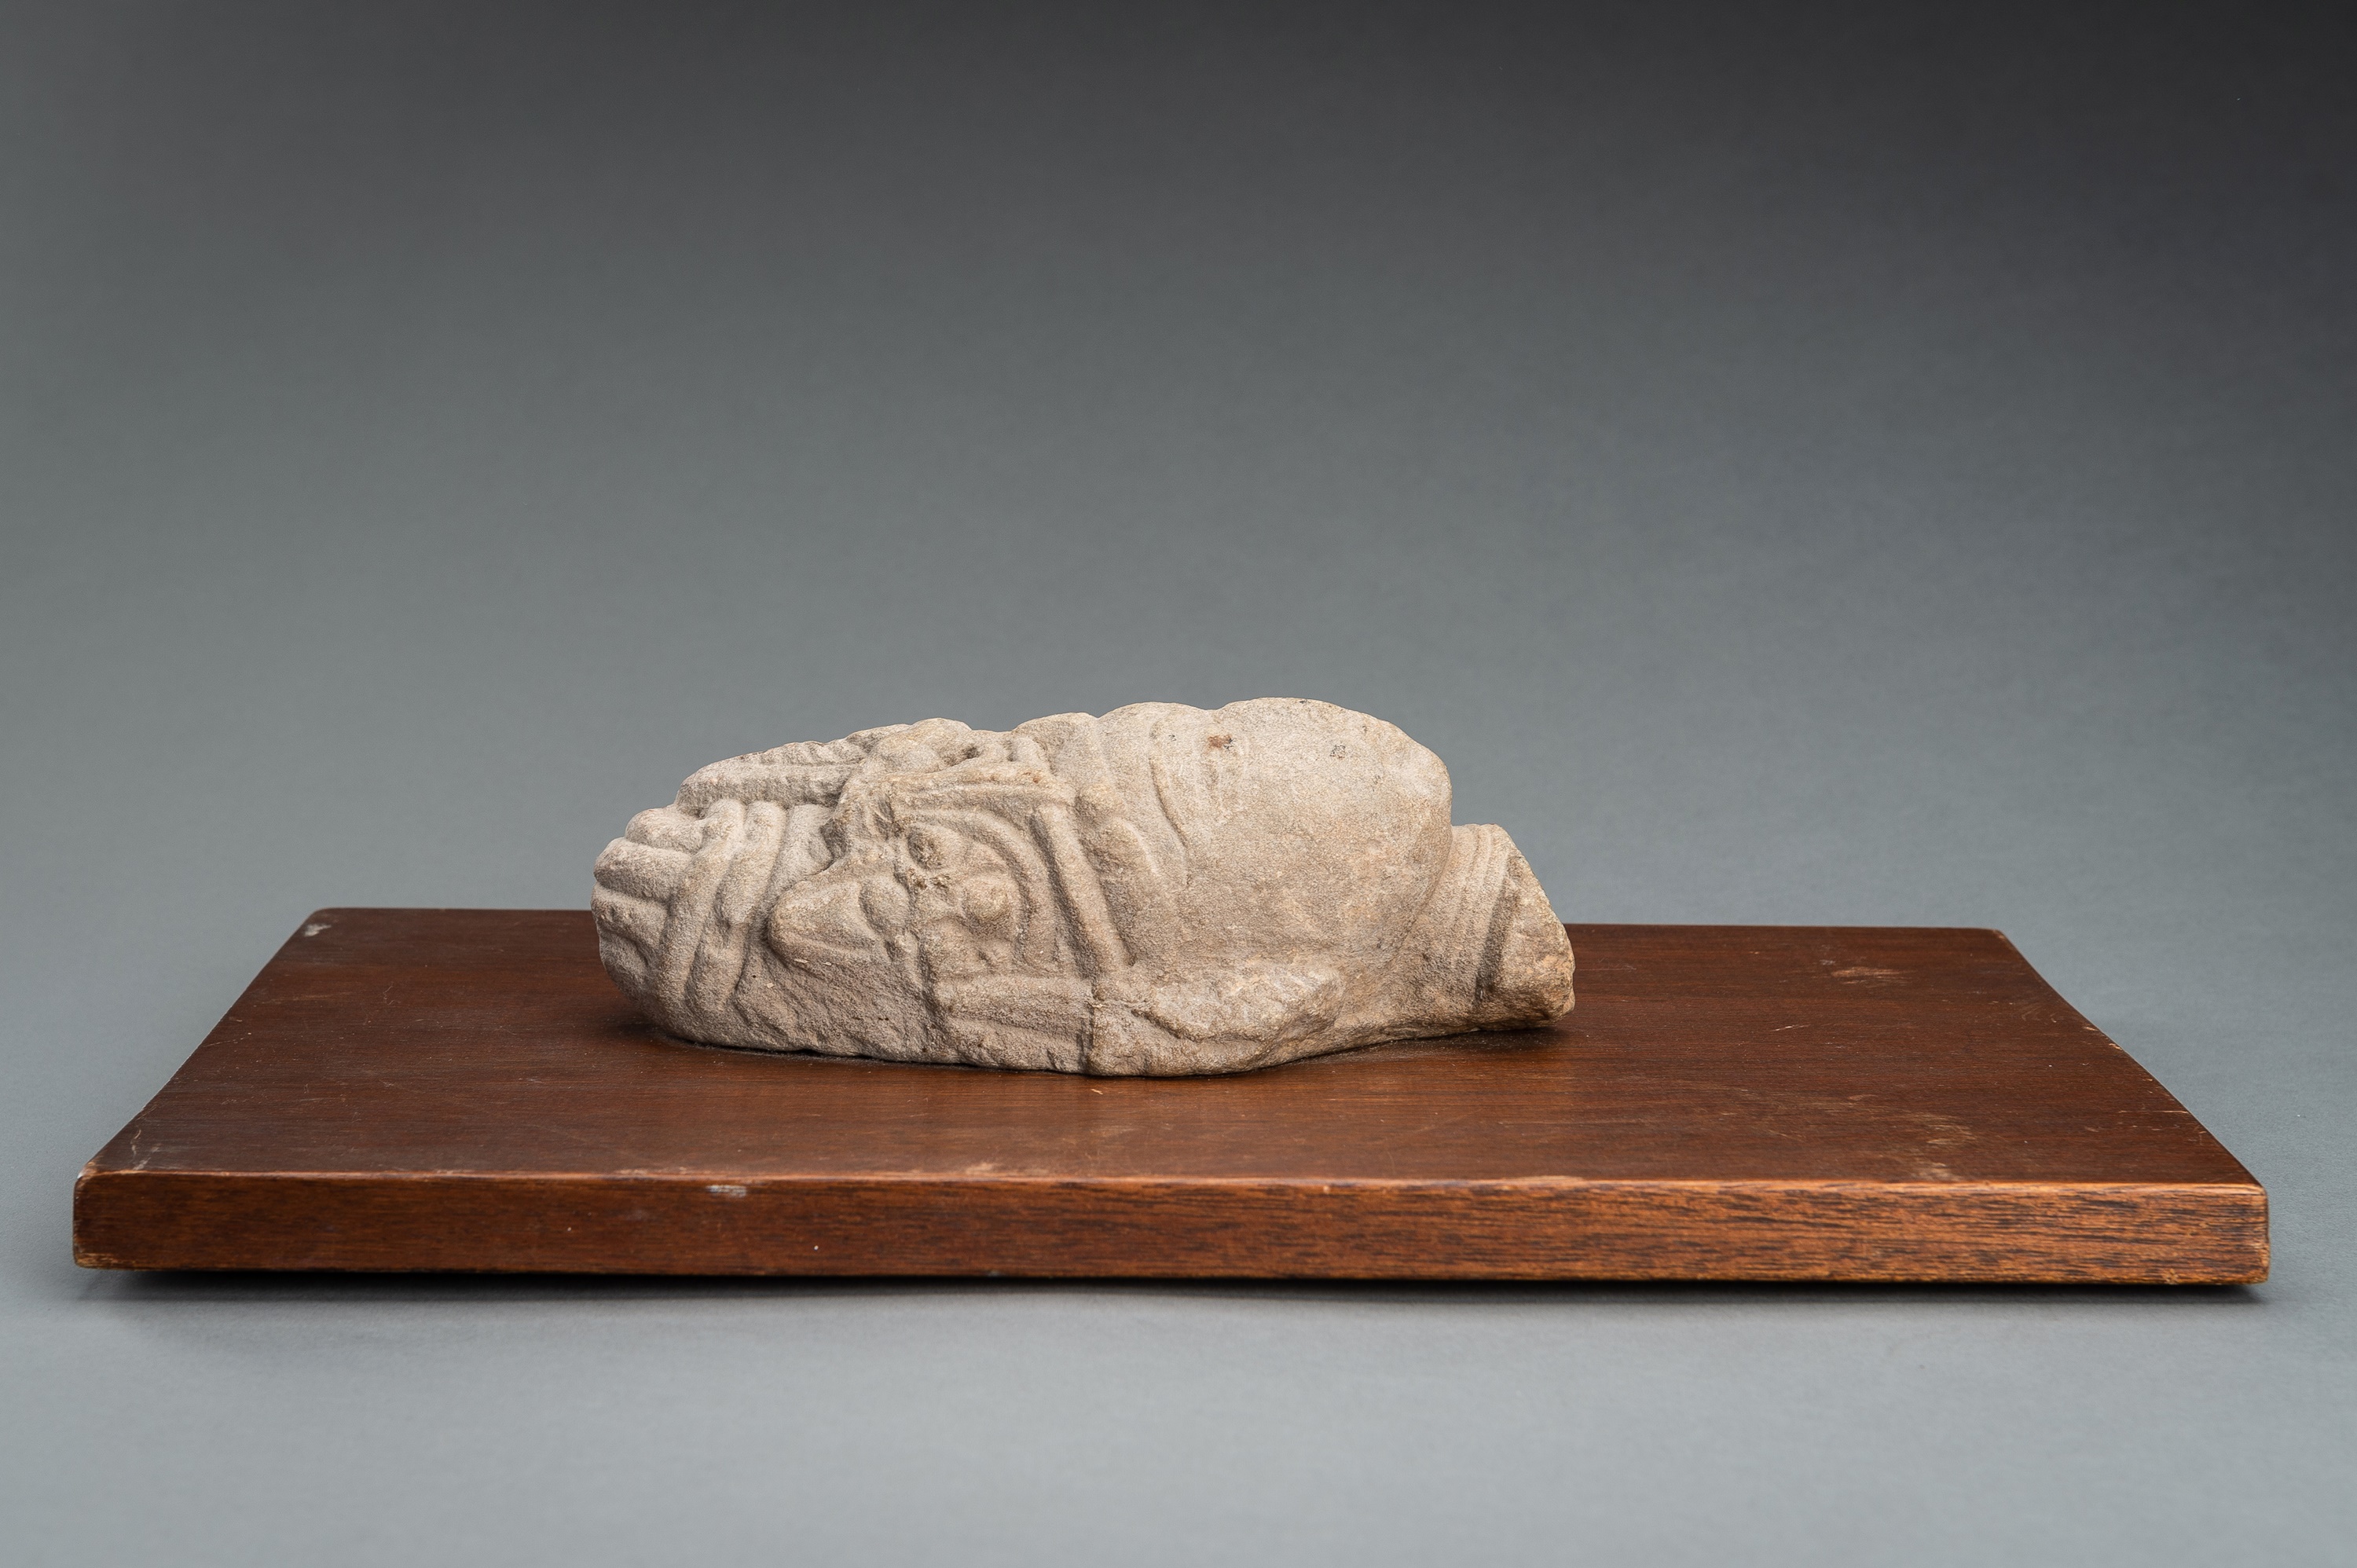 A SANDSTONE HEAD OF VISHNU WITH A MITER CROWN - Image 12 of 14